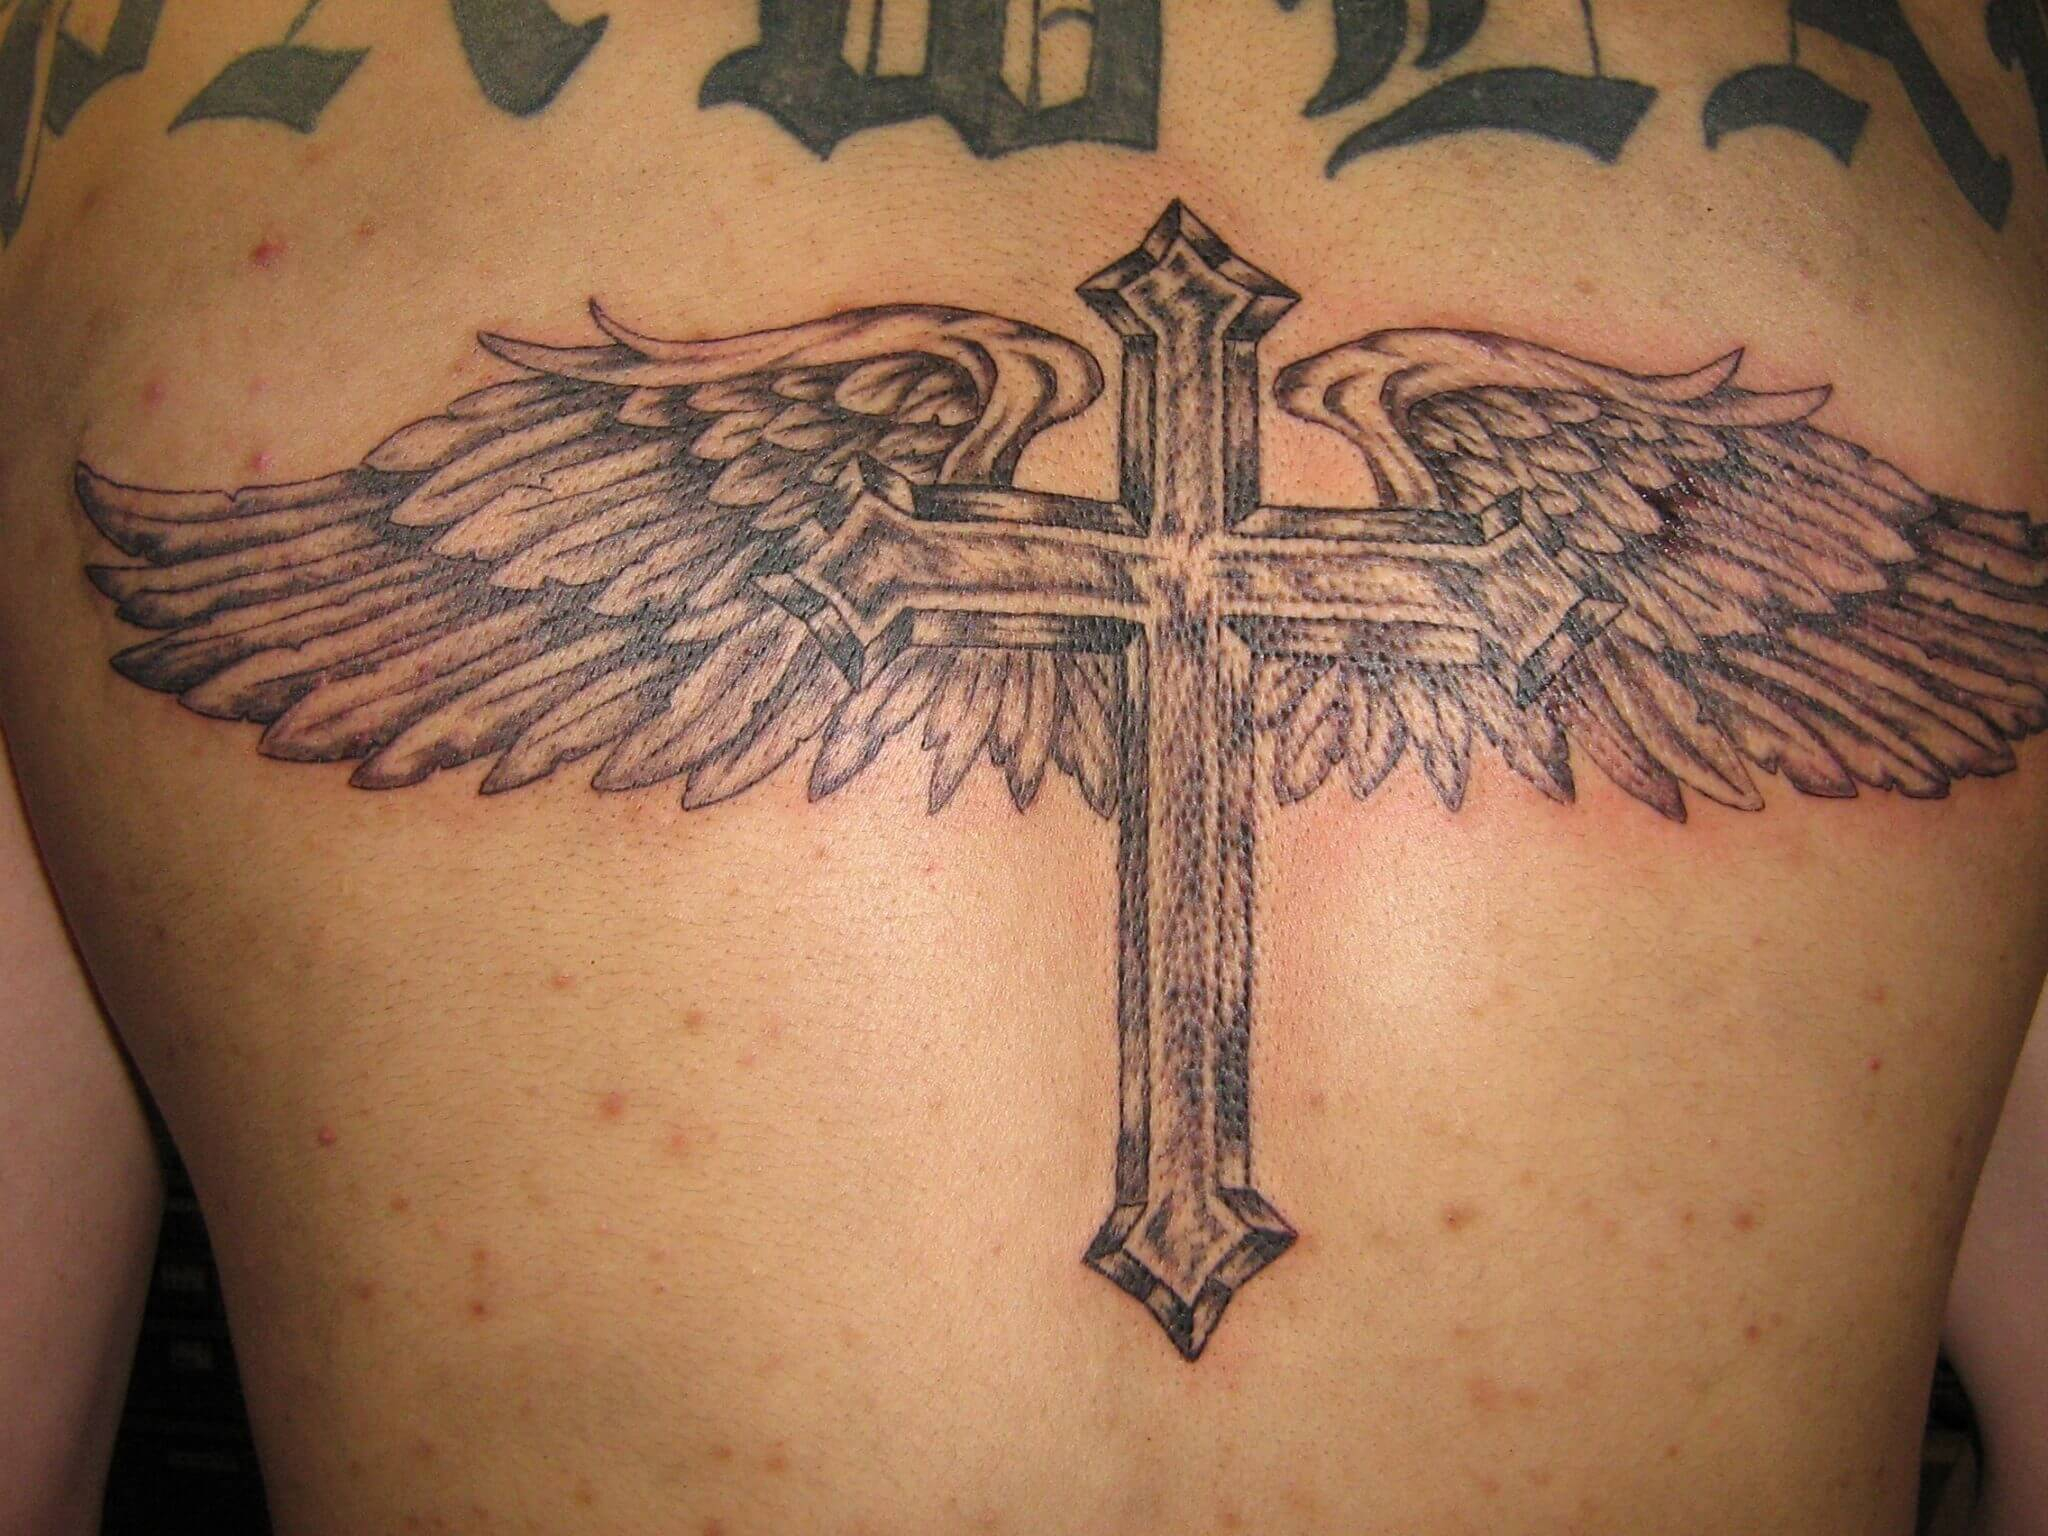 56 Best Cross Tattoos For Men Improb for dimensions 2048 X 1536